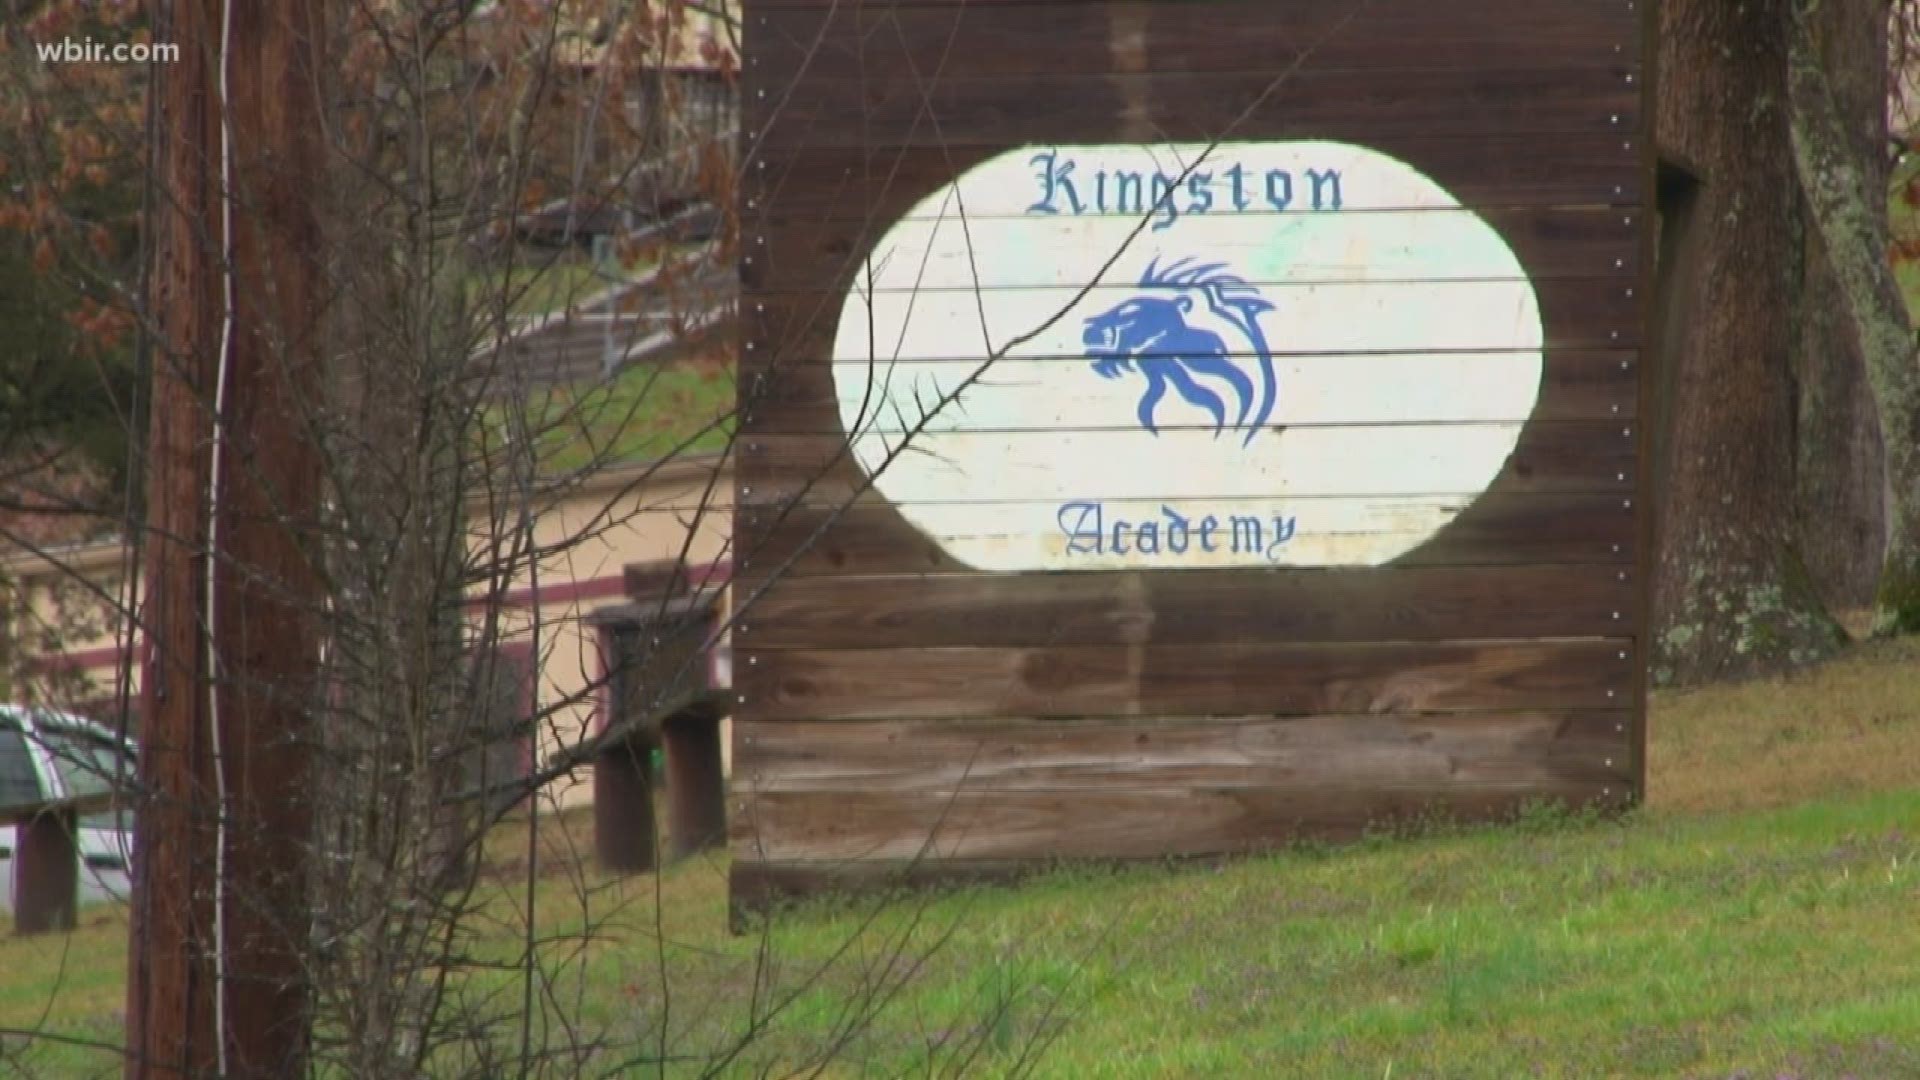 The Department of Children Services says it removed 18 children from the Roane County behavioral health facility called Kingston Academy.